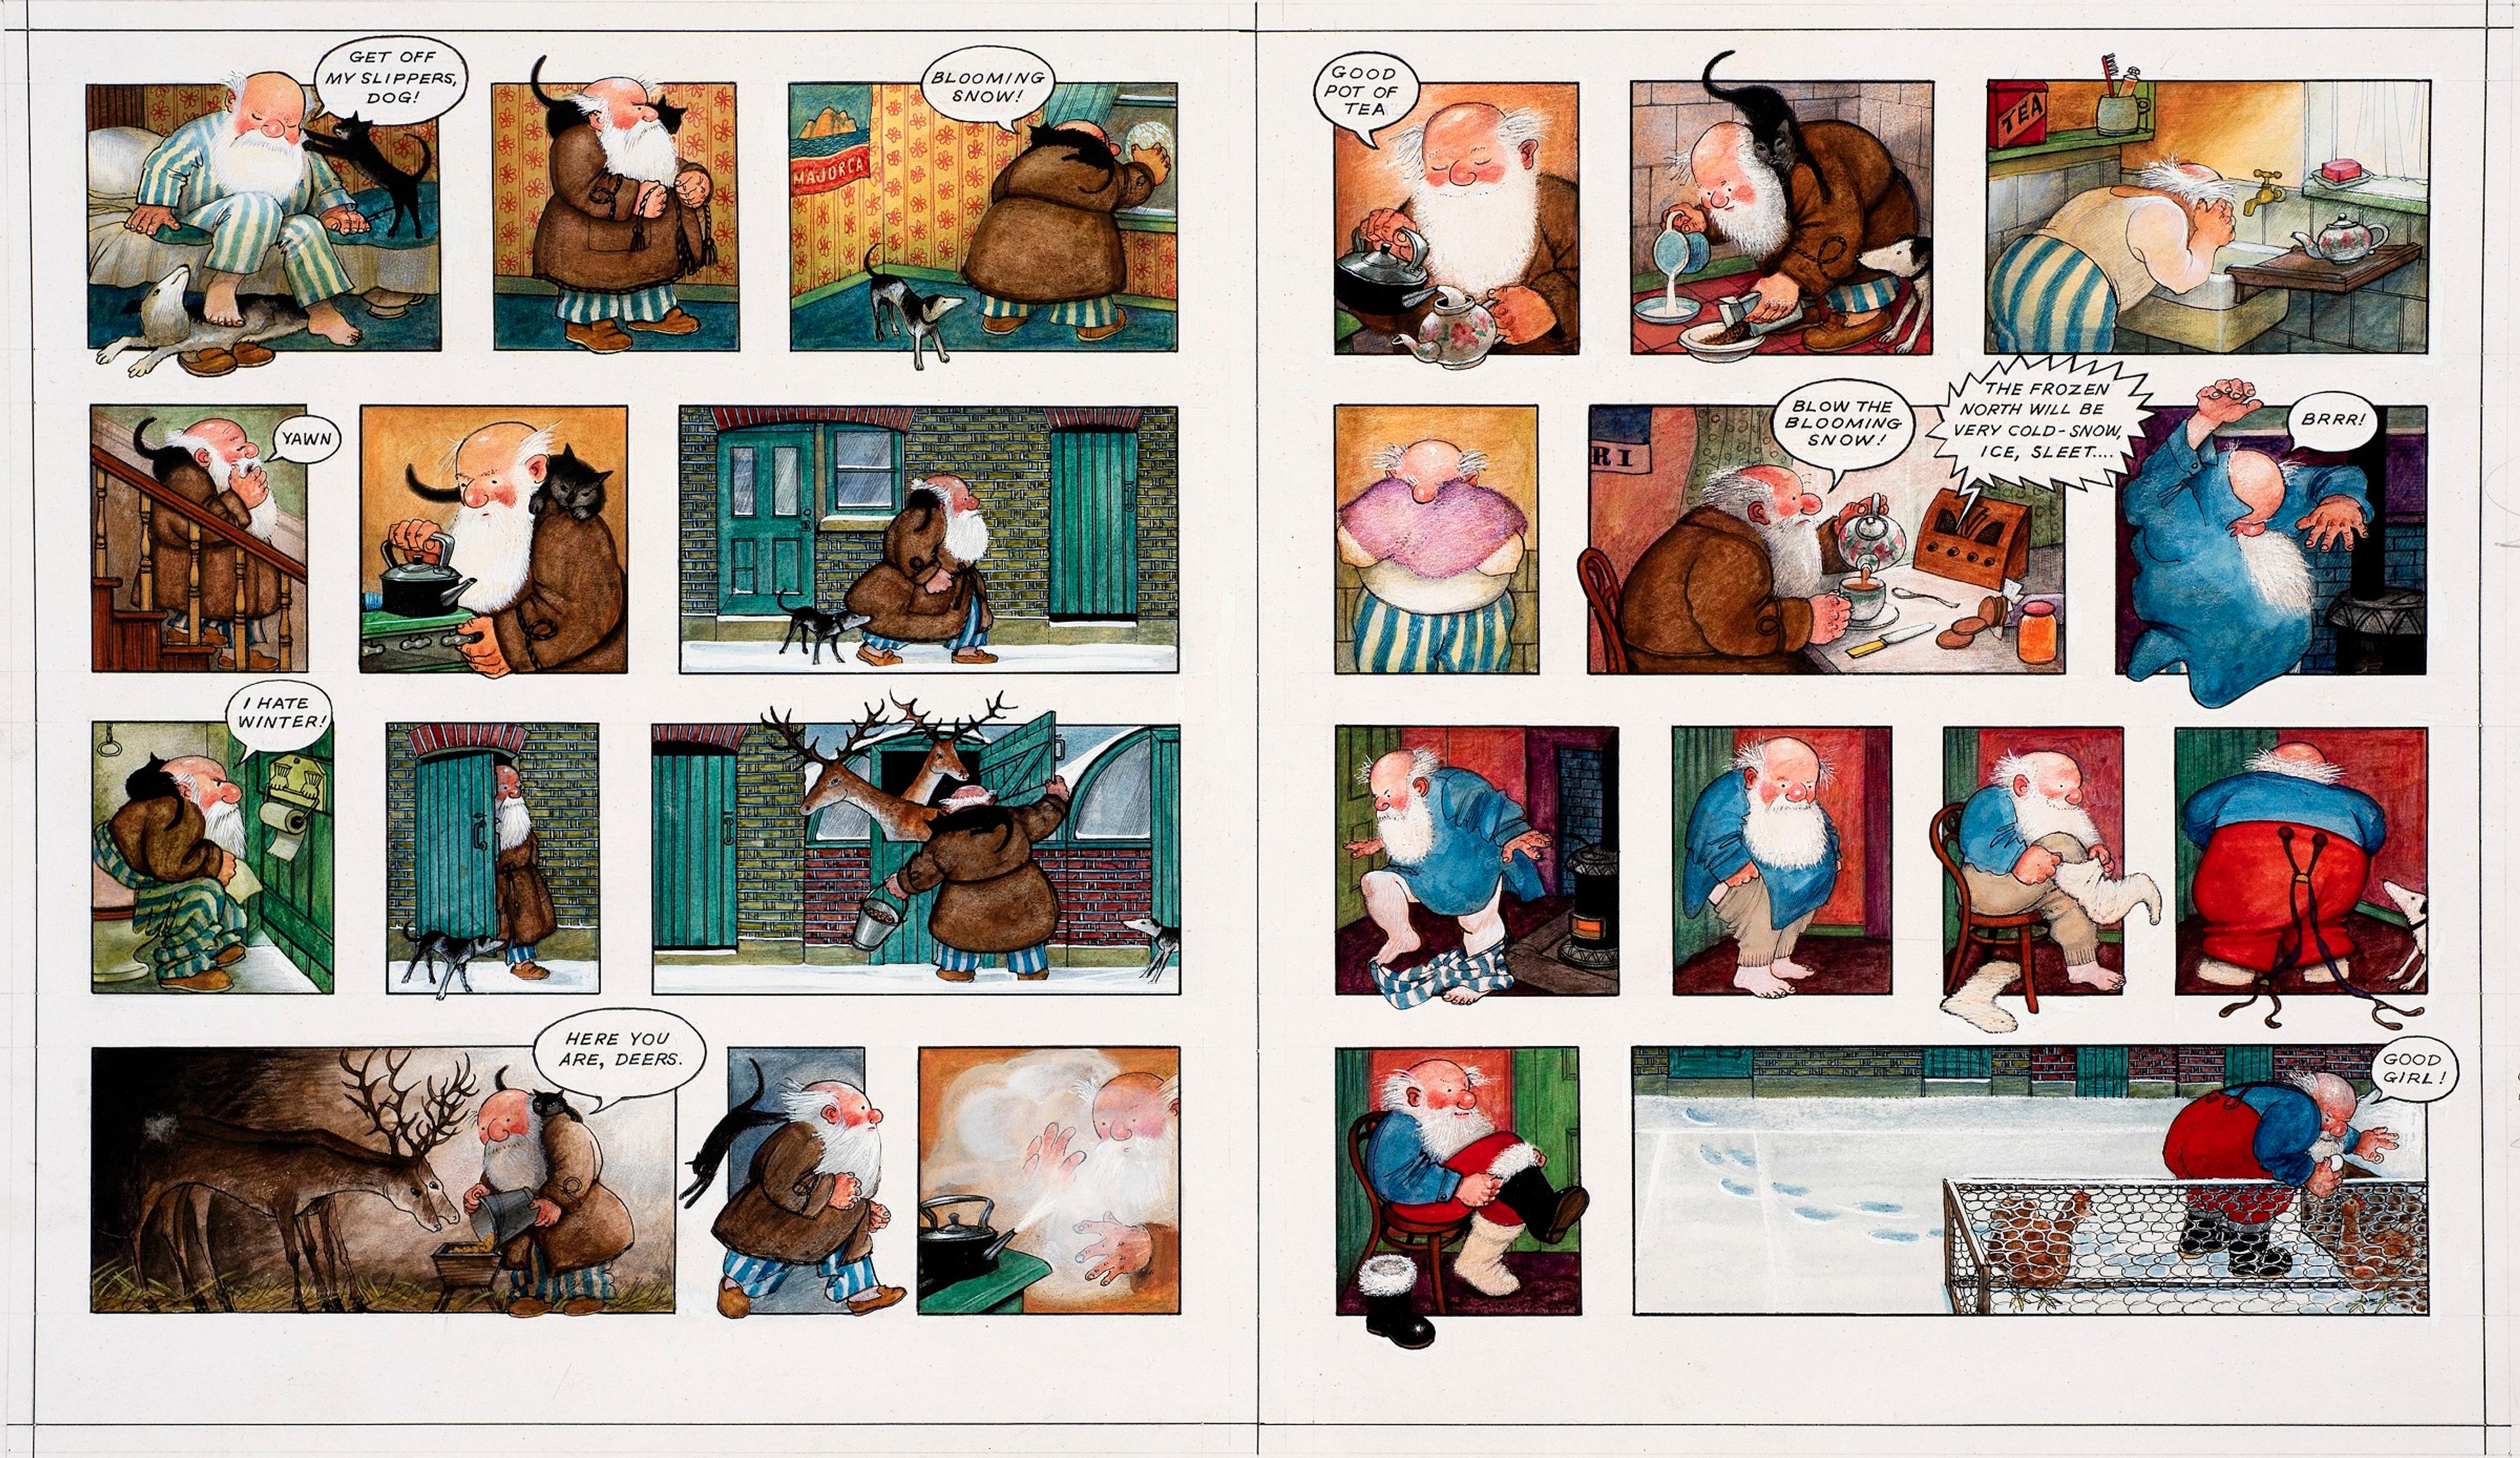 Illustration made up of comic-style panels showing Father Christmas getting up, making breakfast and feeding reindeer and chickens